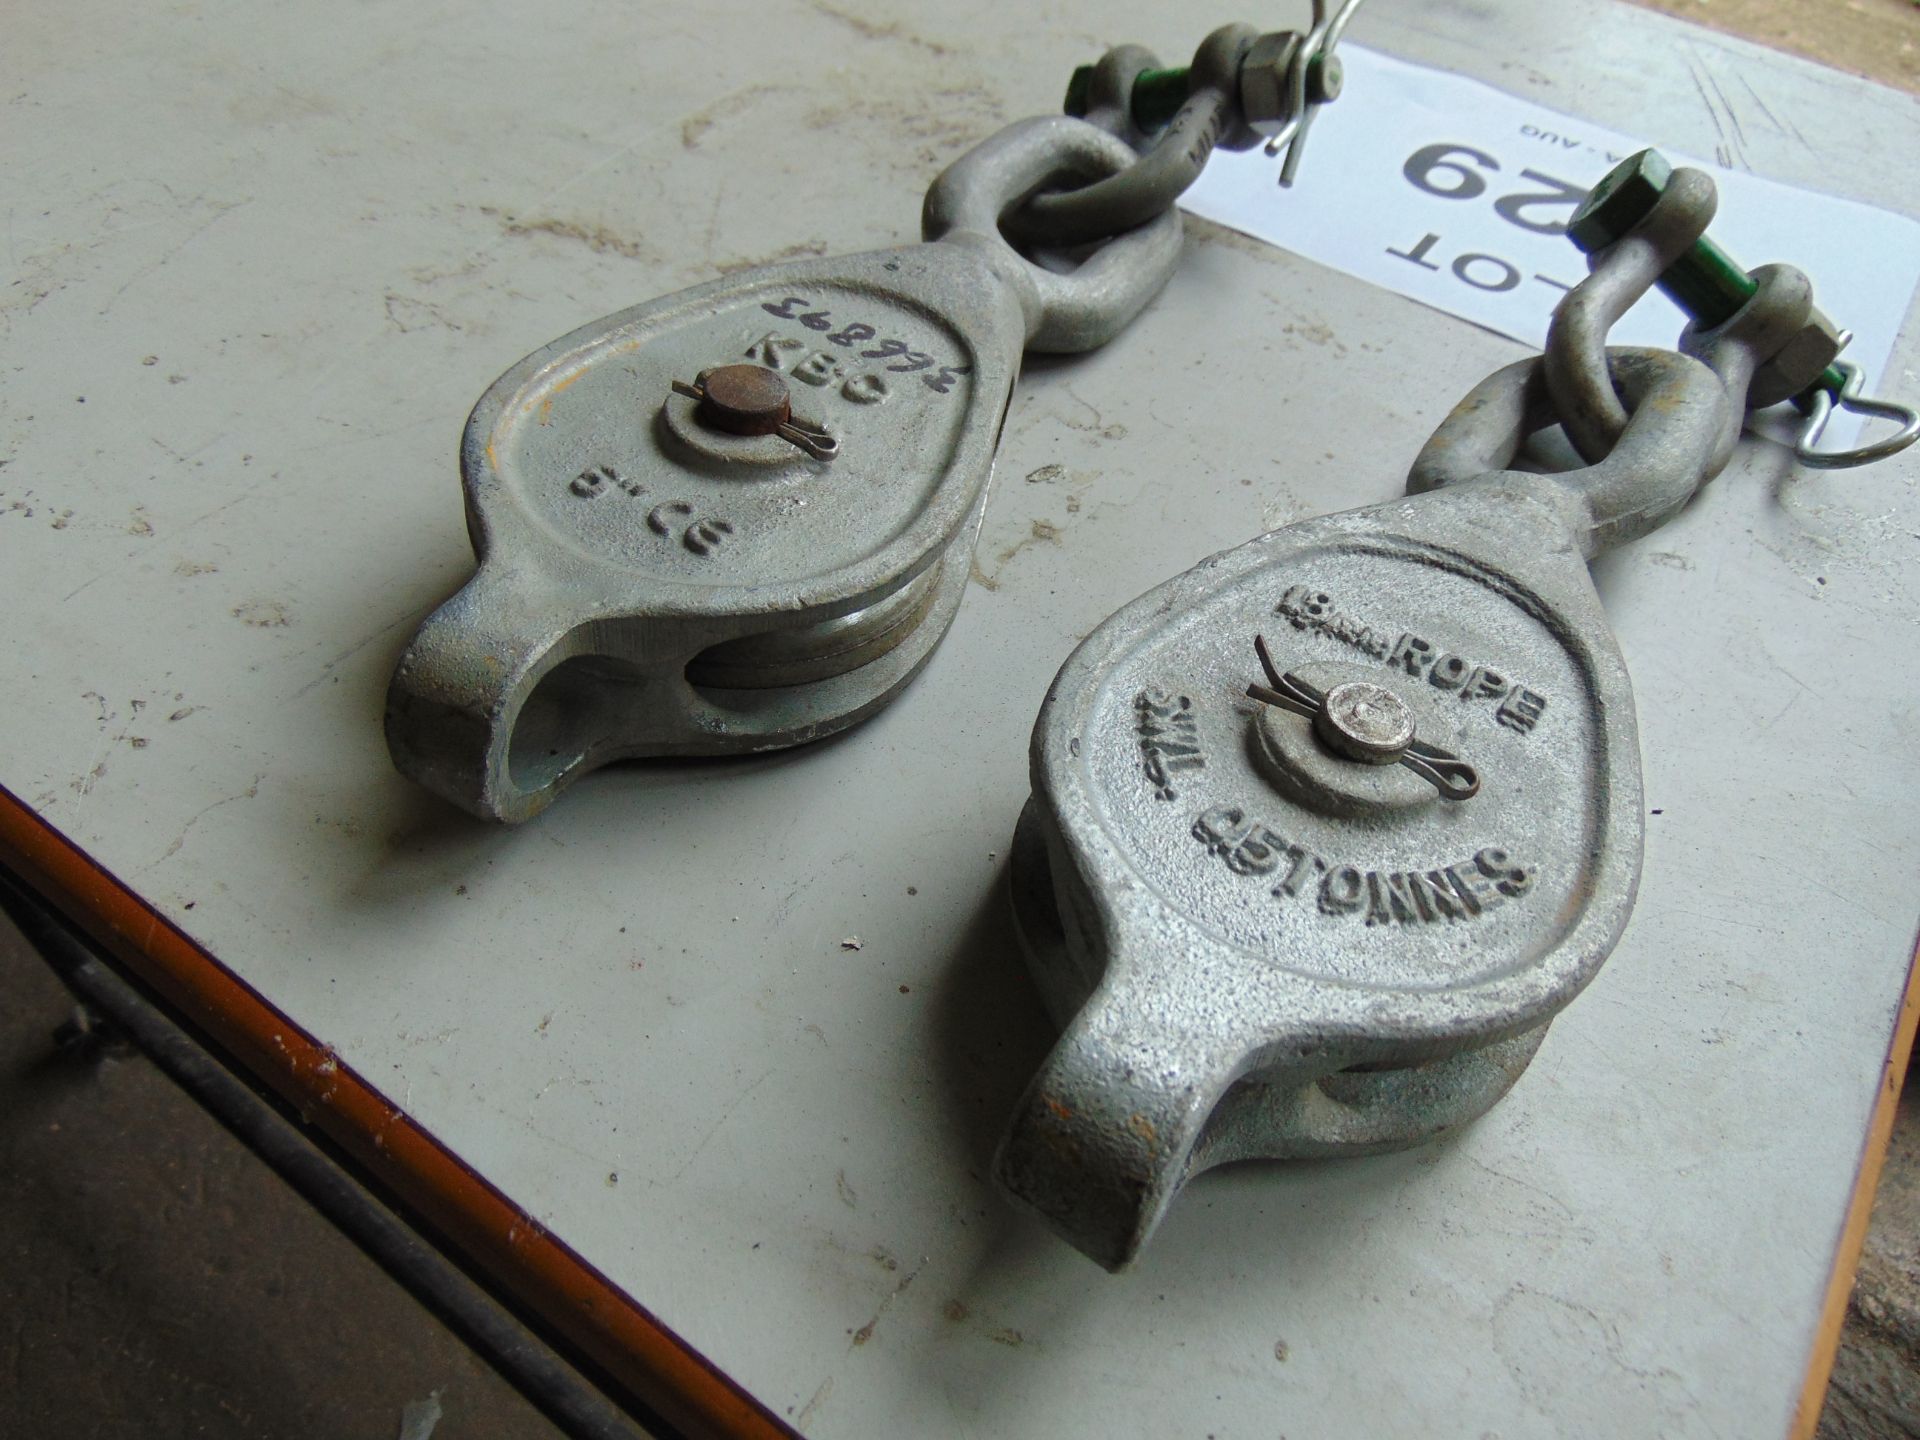 2 x New Unissued 5 inch Winding Snatch blocks as shown - Image 5 of 5